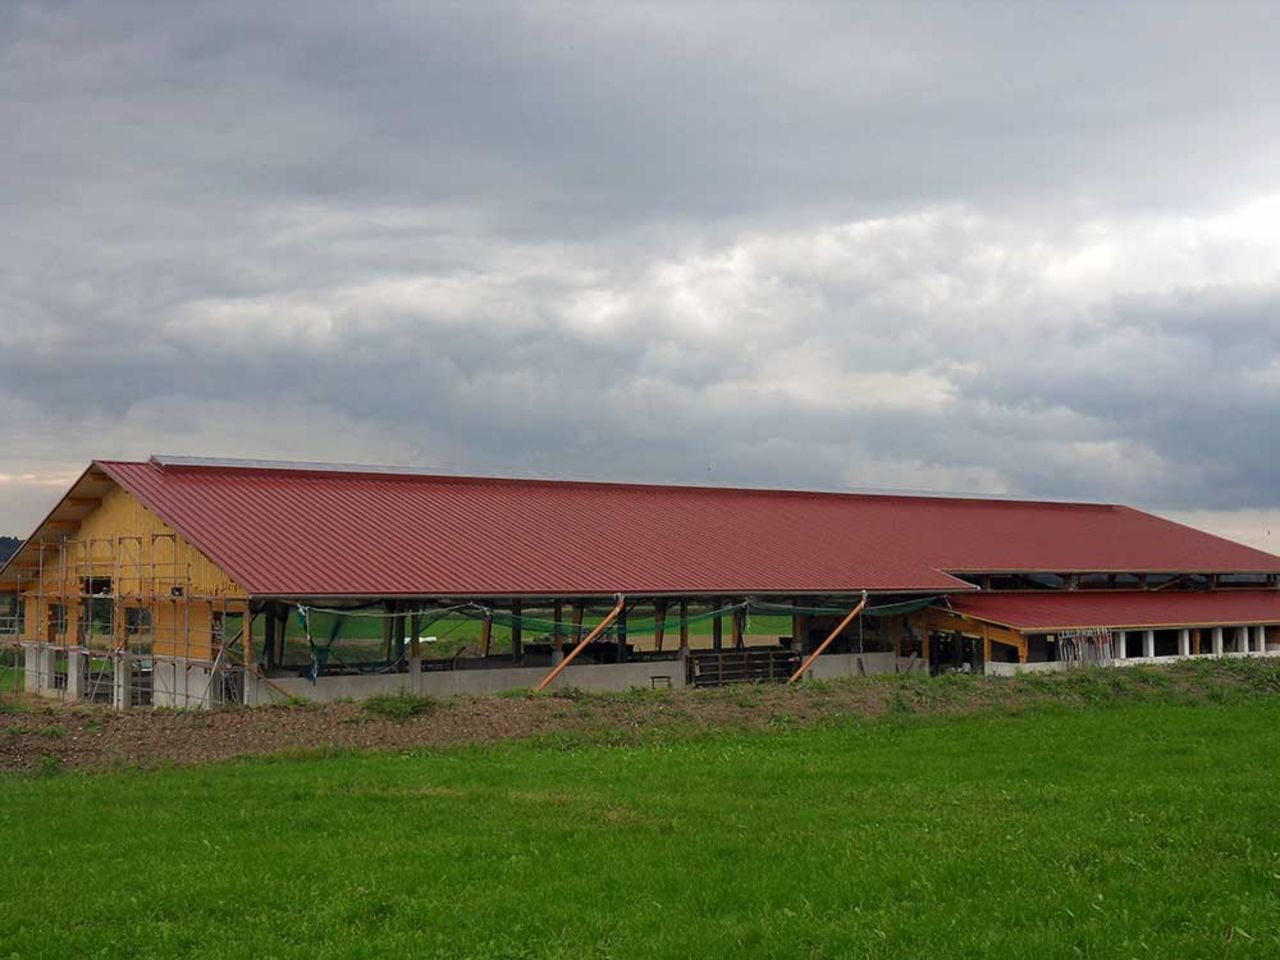 Construction of a new dairy barn